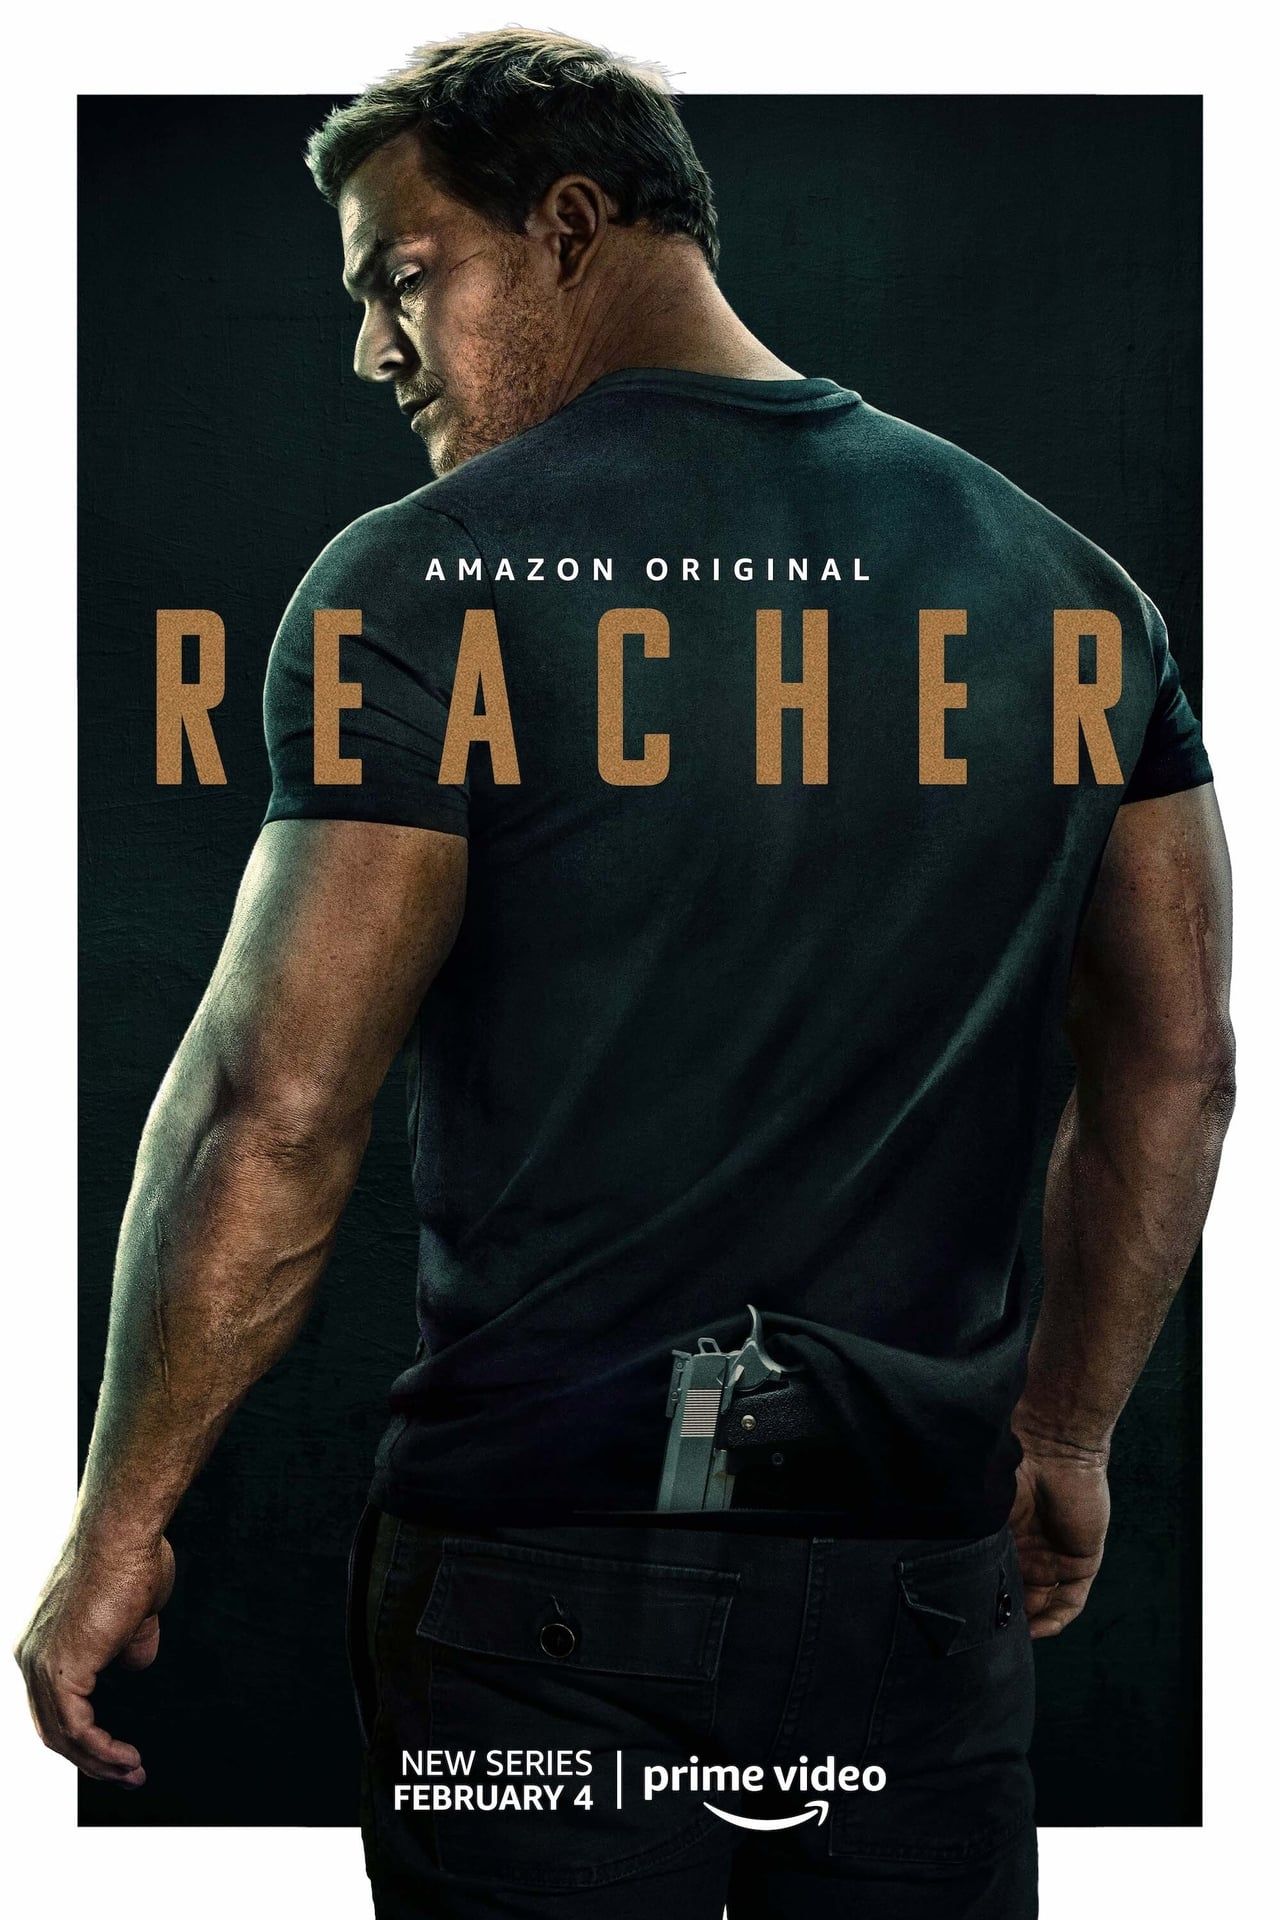 TV REVIEW: Reacher S1E1: “Welcome to Margrave” - COMIC CRUSADERS